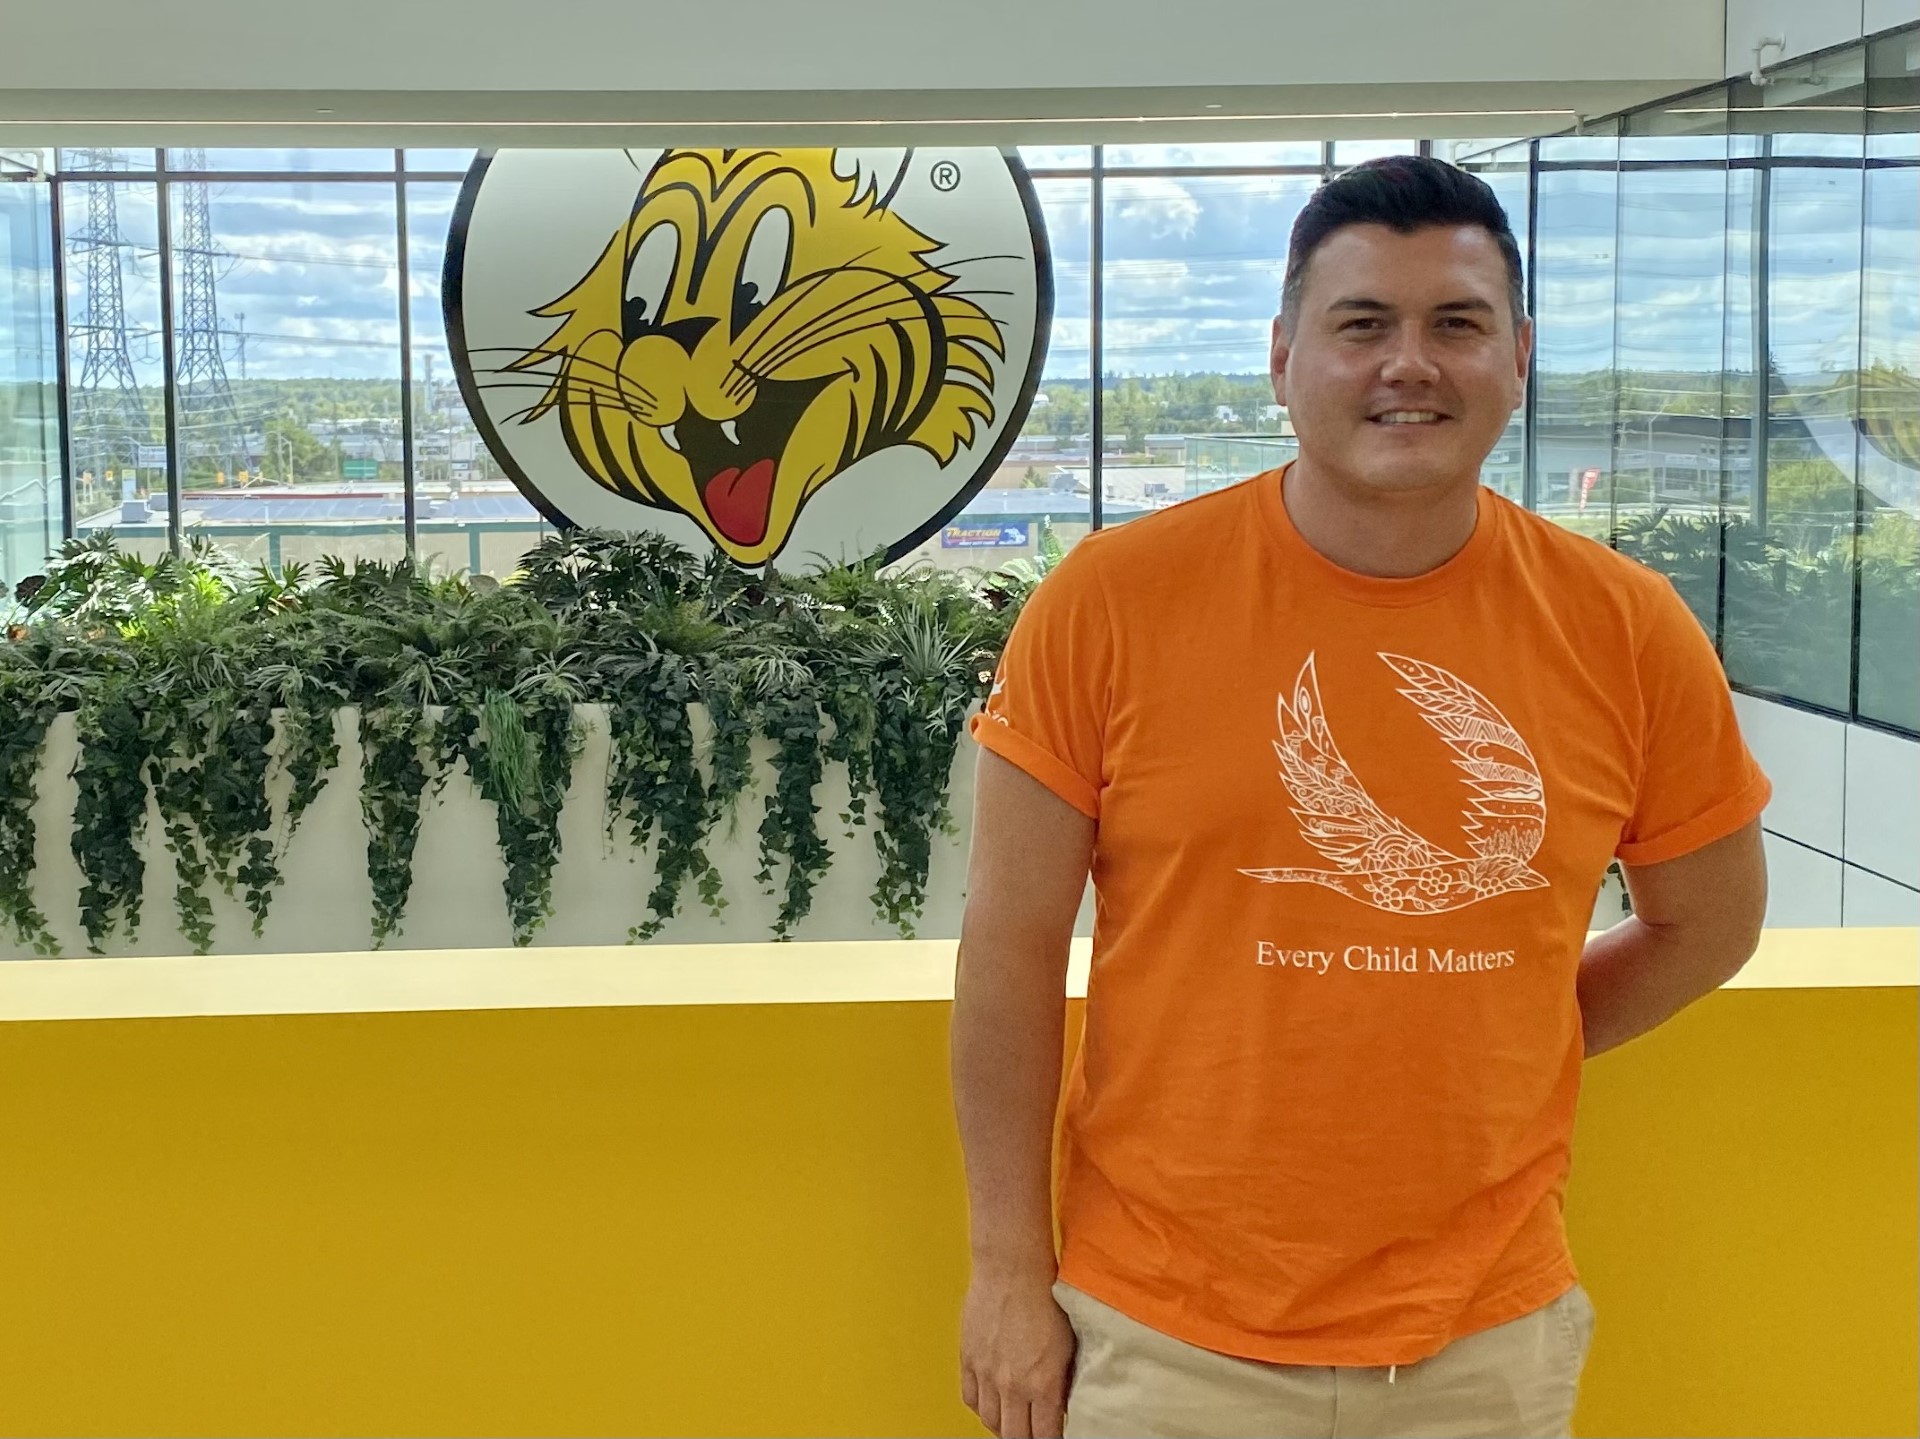 Patrick Hunter standing in front of Giant Tiger head office logo, wearing an orange T-shirt he designed, for his campaign with Giant Tiger and Indspire